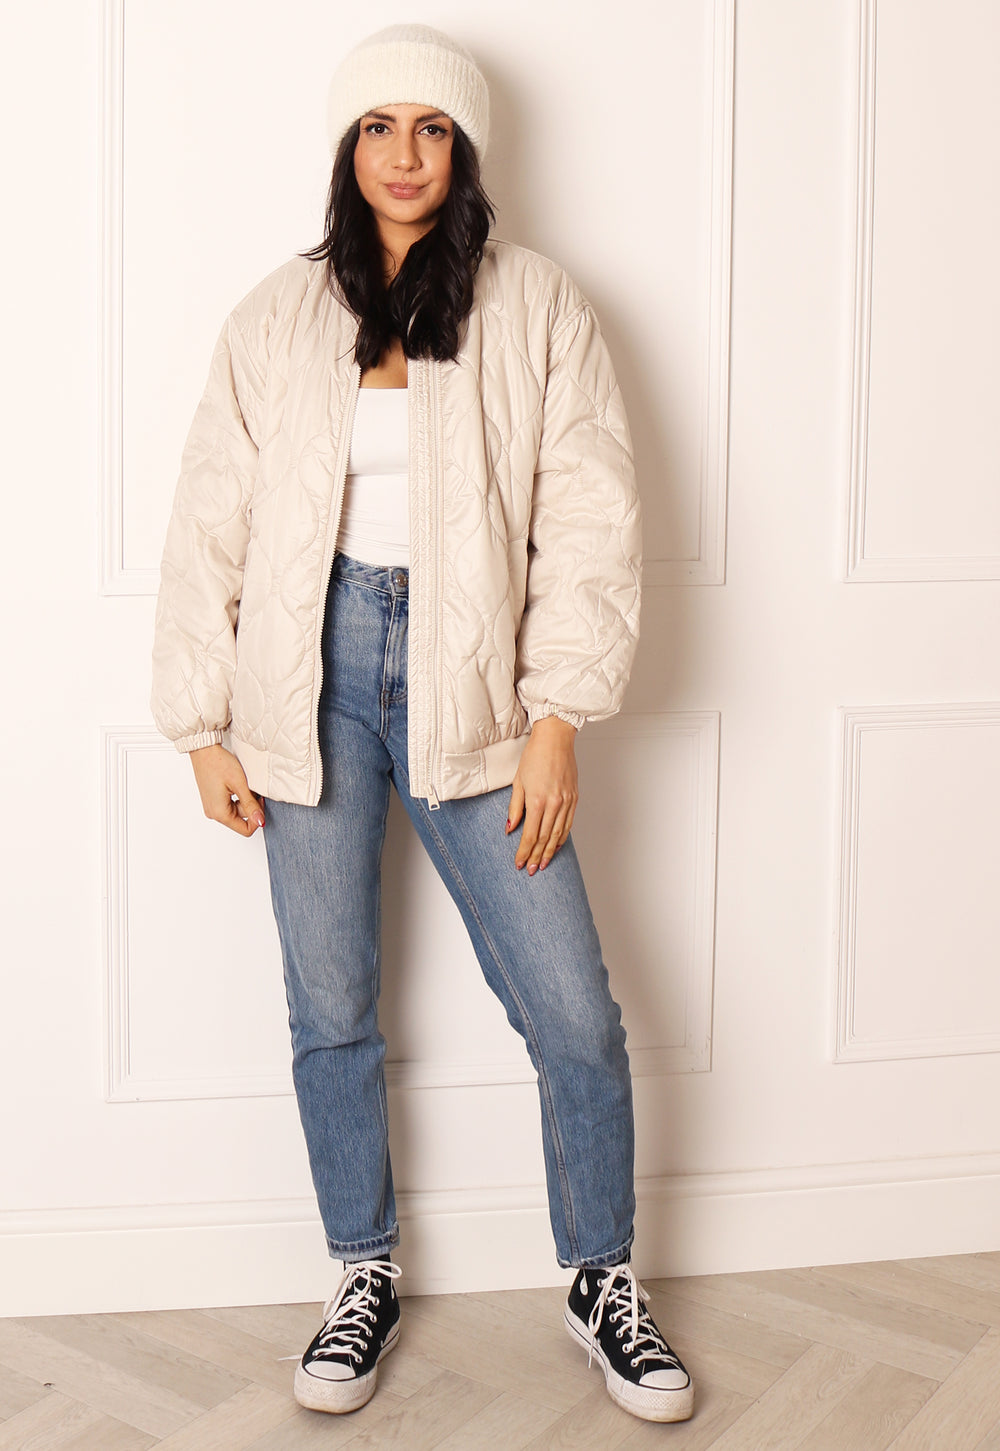 Willow Quilted Oversized Bomber Jacket in Cream | One Nation Clothing VERO MODA Willow Onion Quilted Oversized Bomber Jacket in Cream